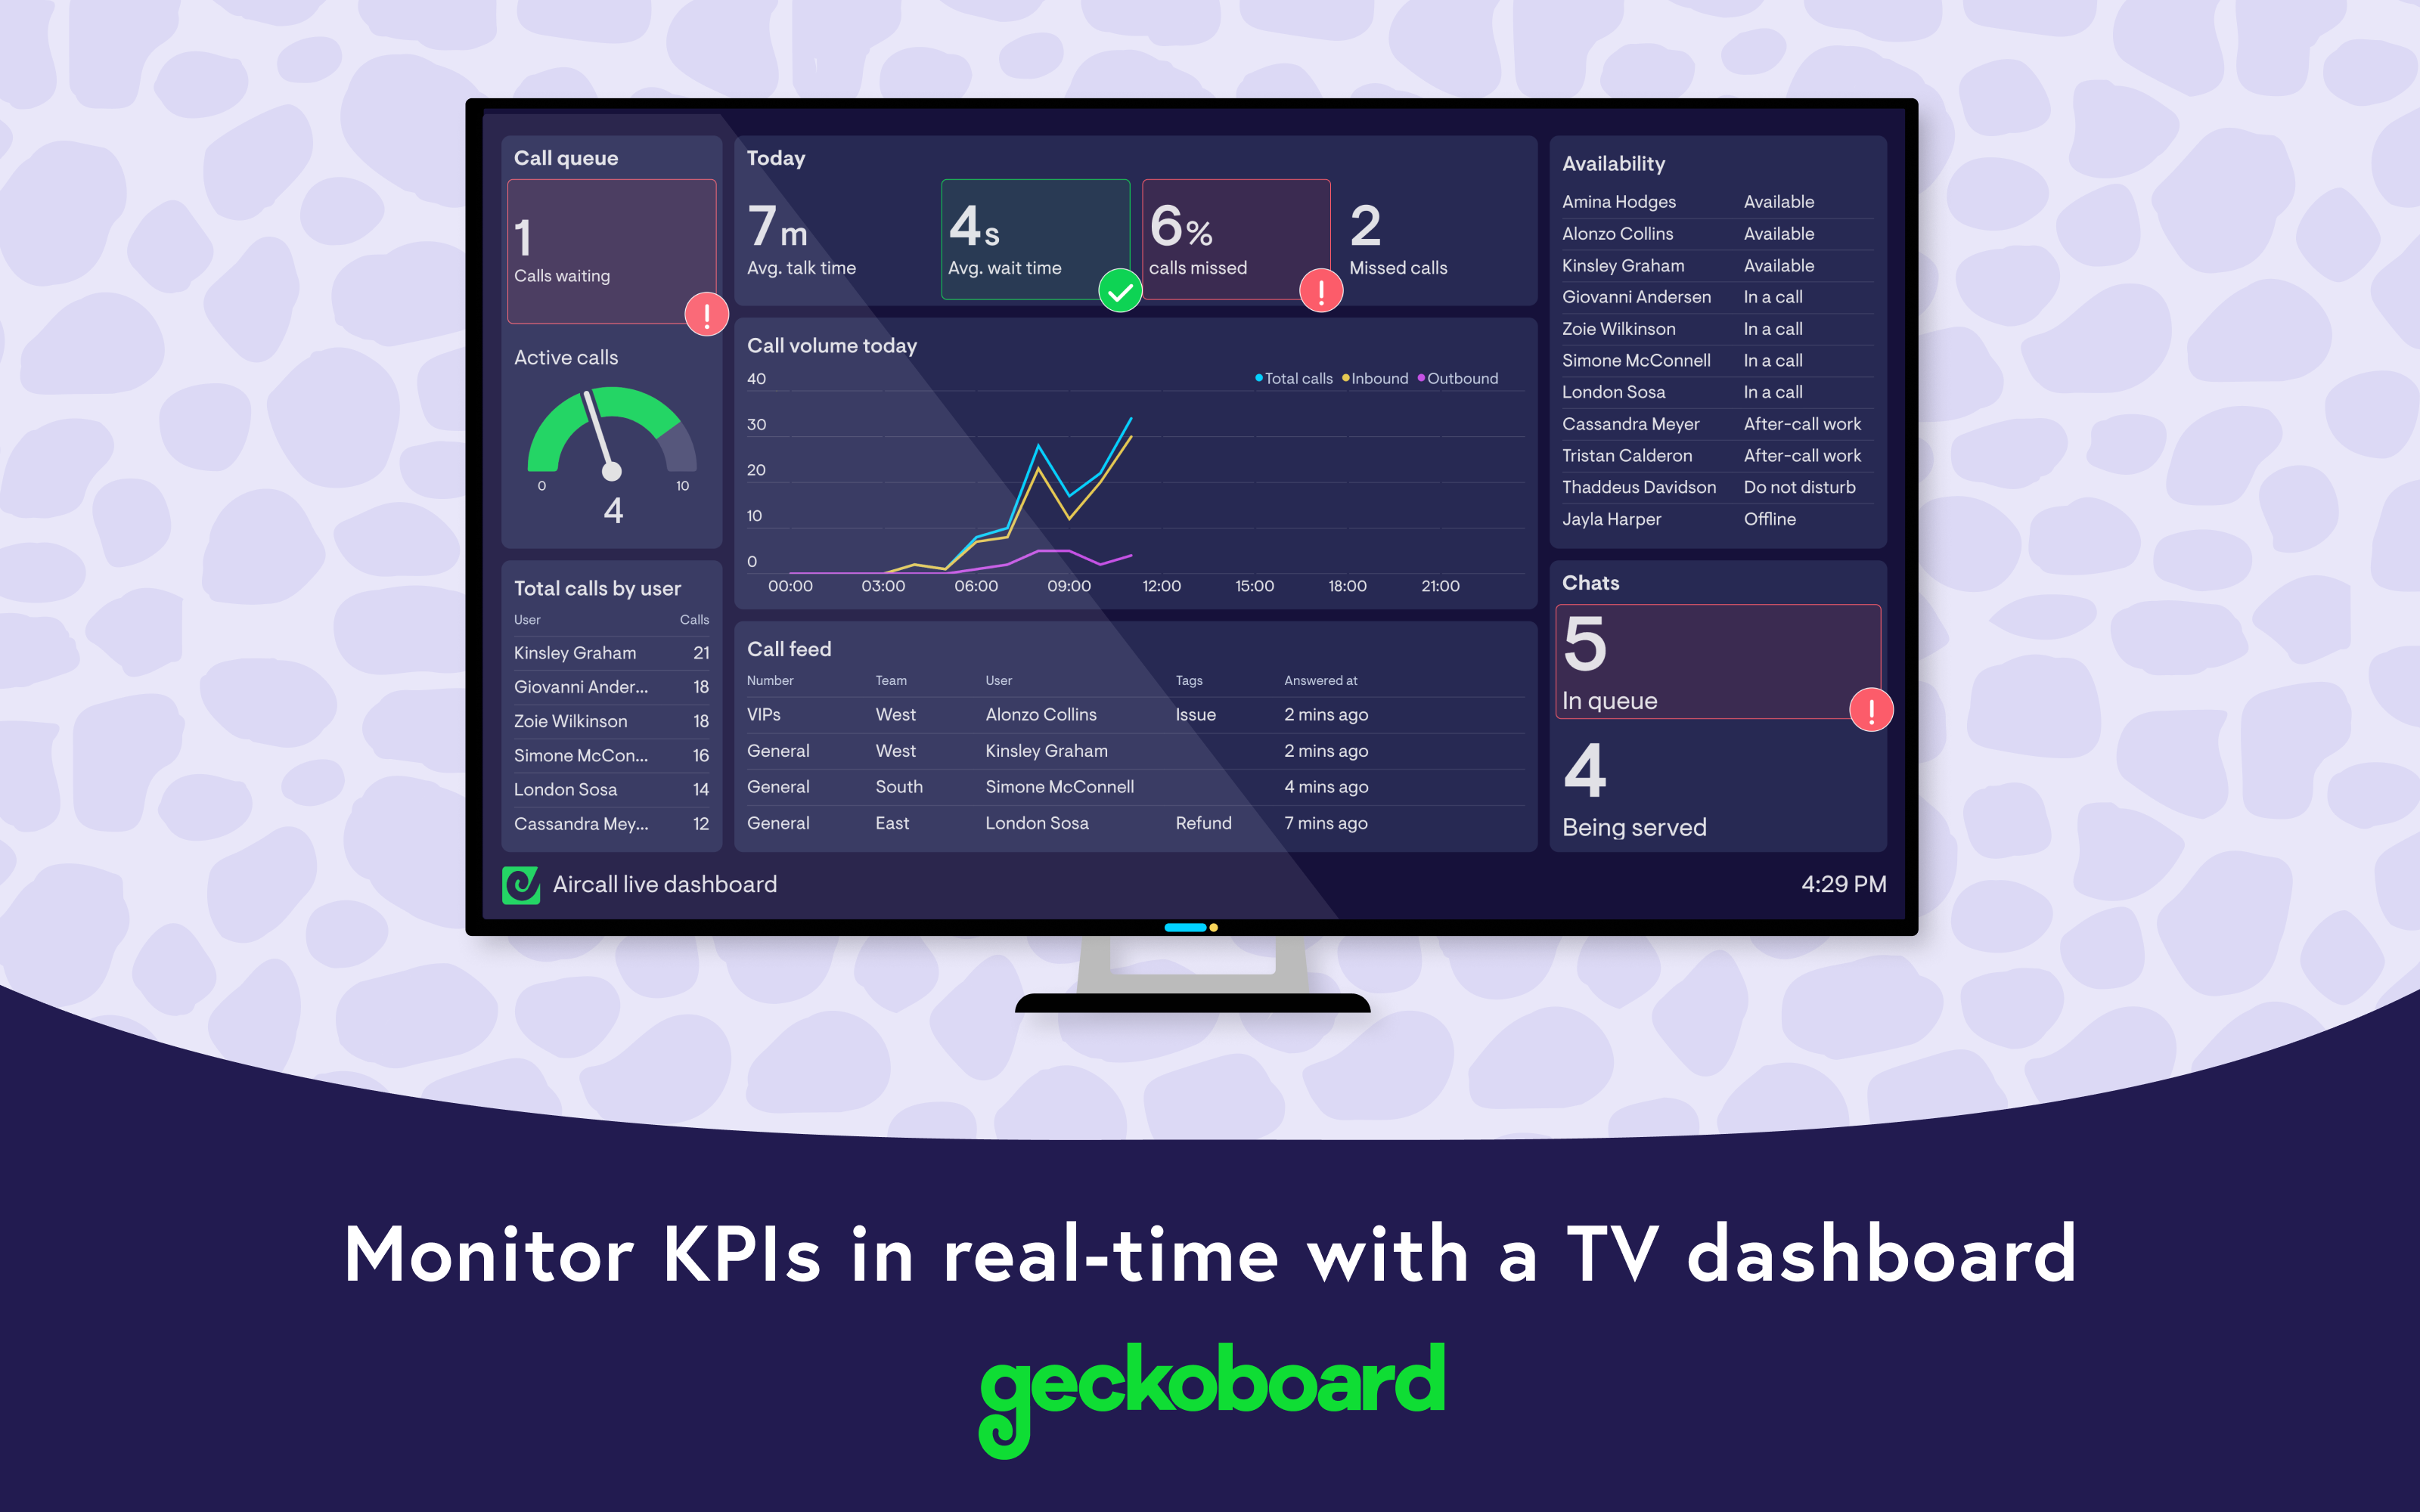 Monitor KPIs in real-time with a TV dashboard